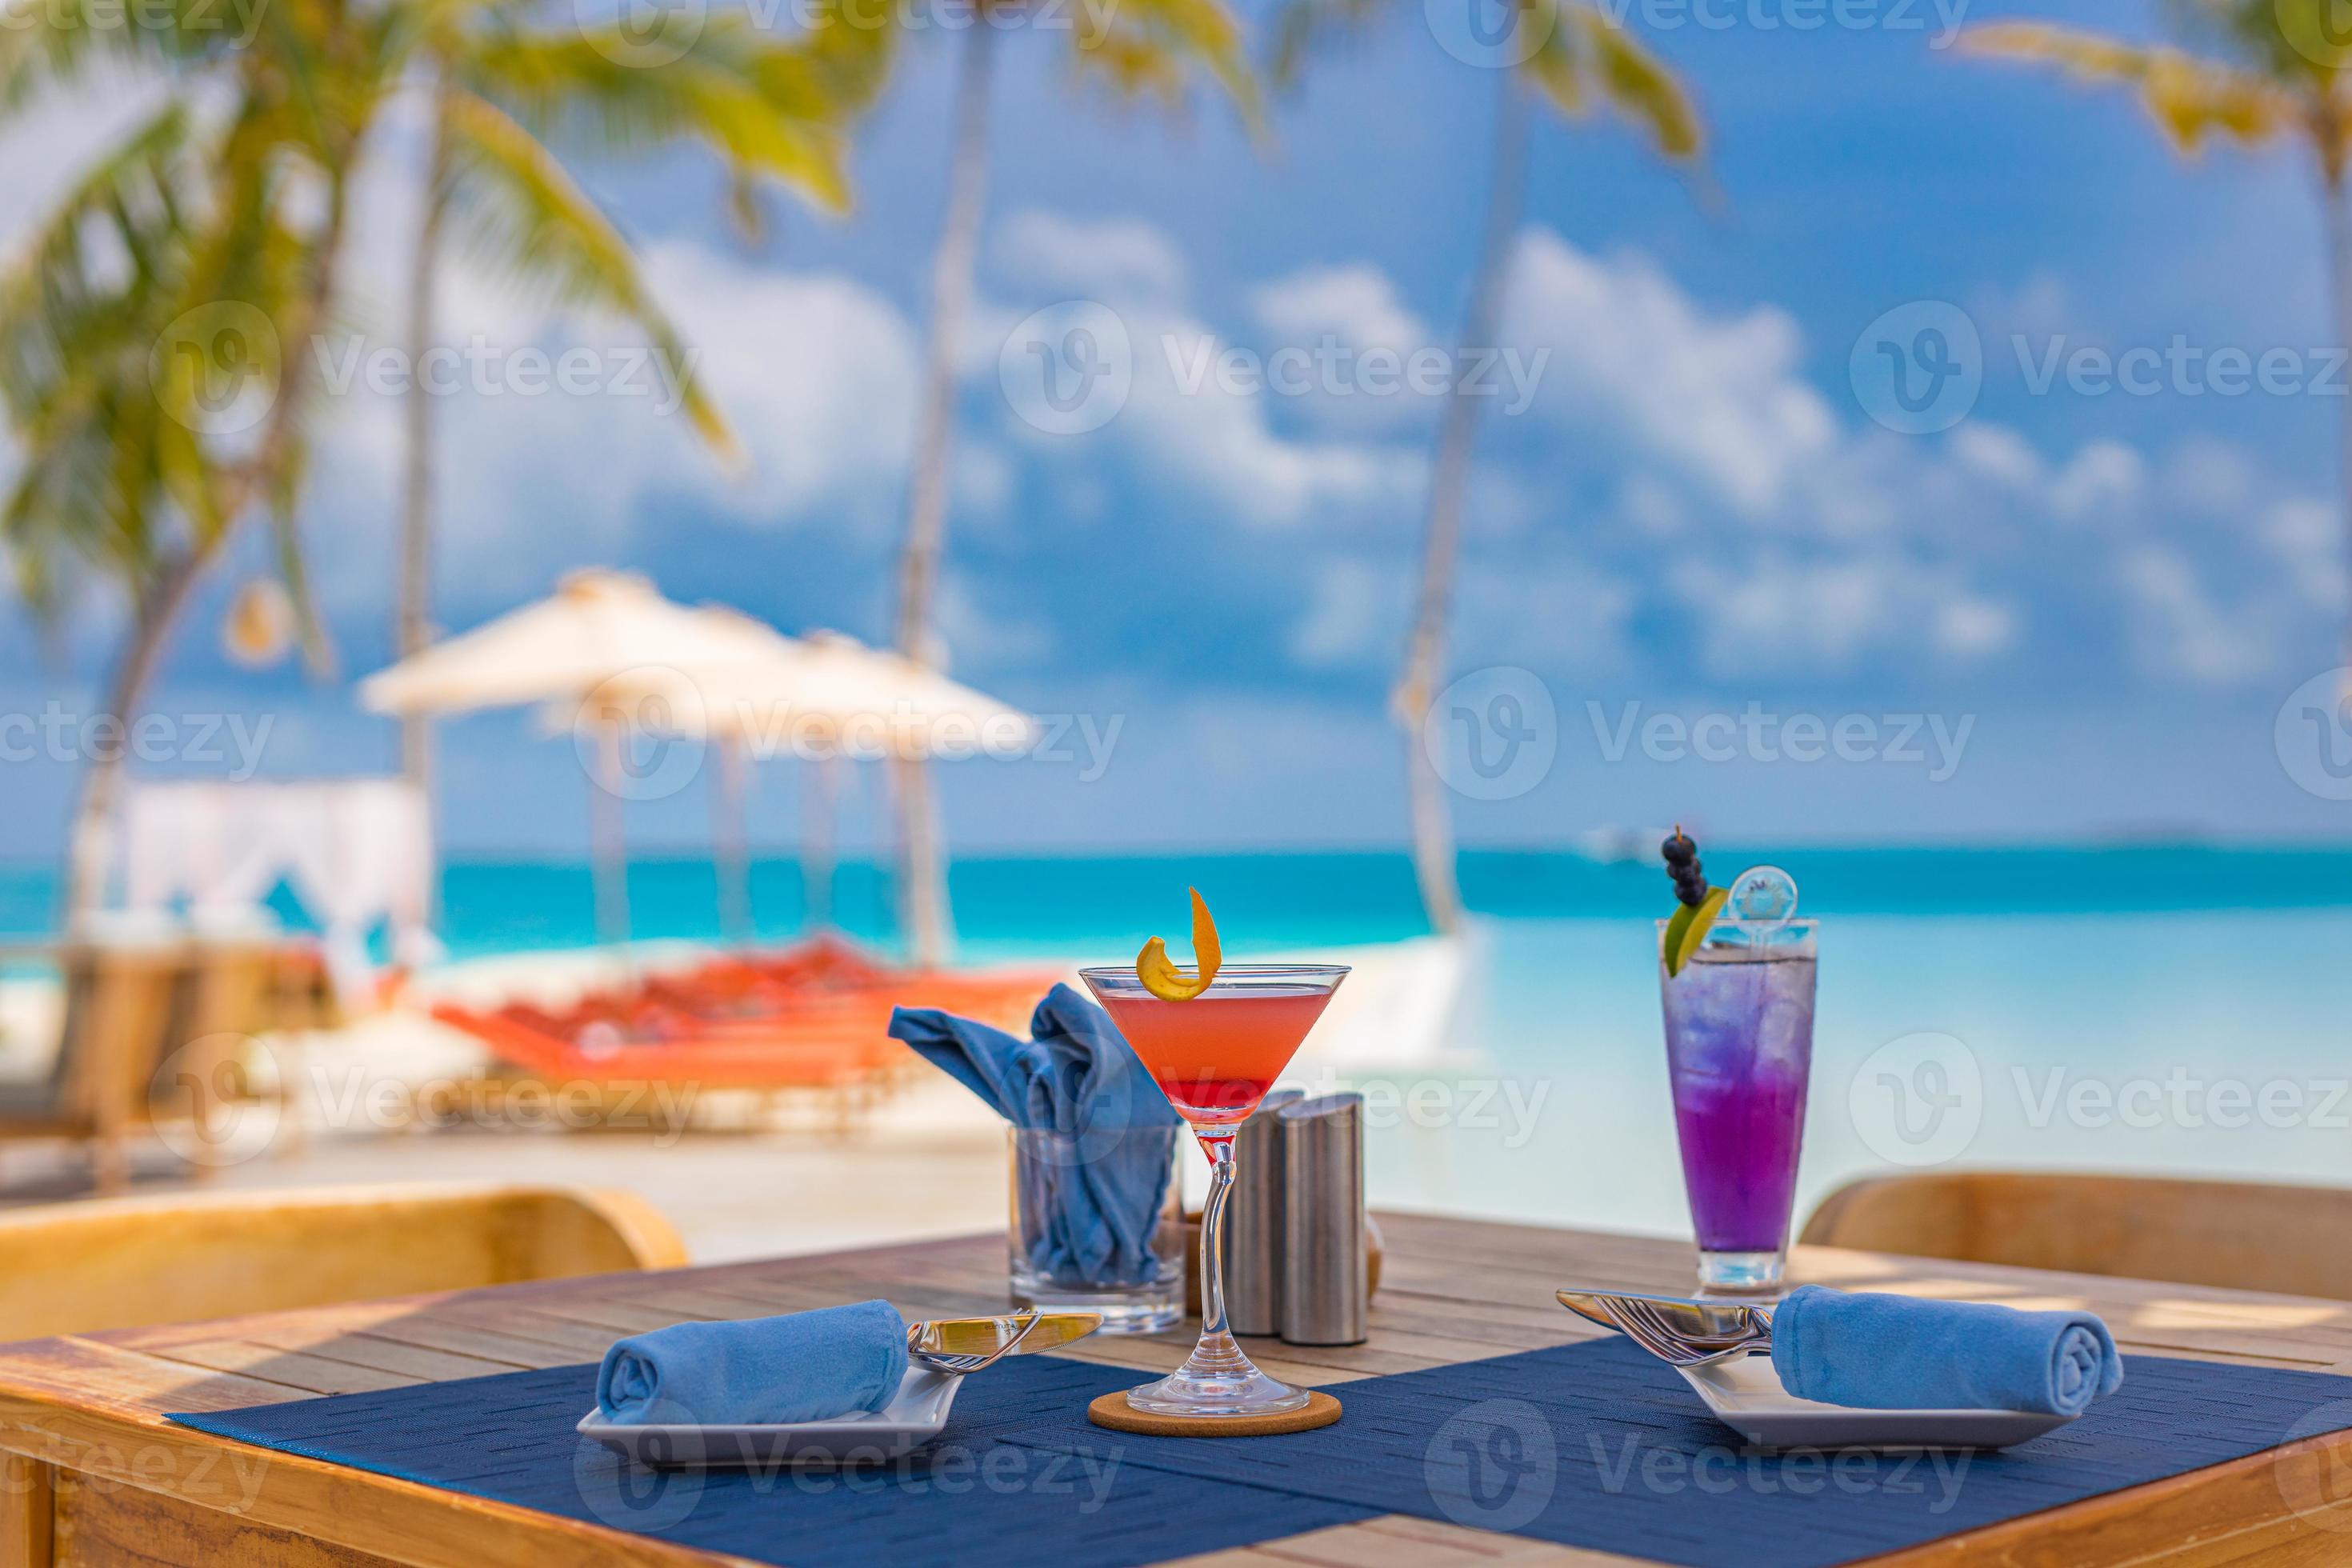 https://static.vecteezy.com/system/resources/previews/004/898/980/large_2x/luxury-resort-hotel-poolside-outdoor-restaurant-on-the-beach-ocean-and-sky-tropical-island-cafe-tables-food-summer-vacation-or-holiday-family-travel-palm-trees-infinity-pool-cocktails-relax-photo.jpg